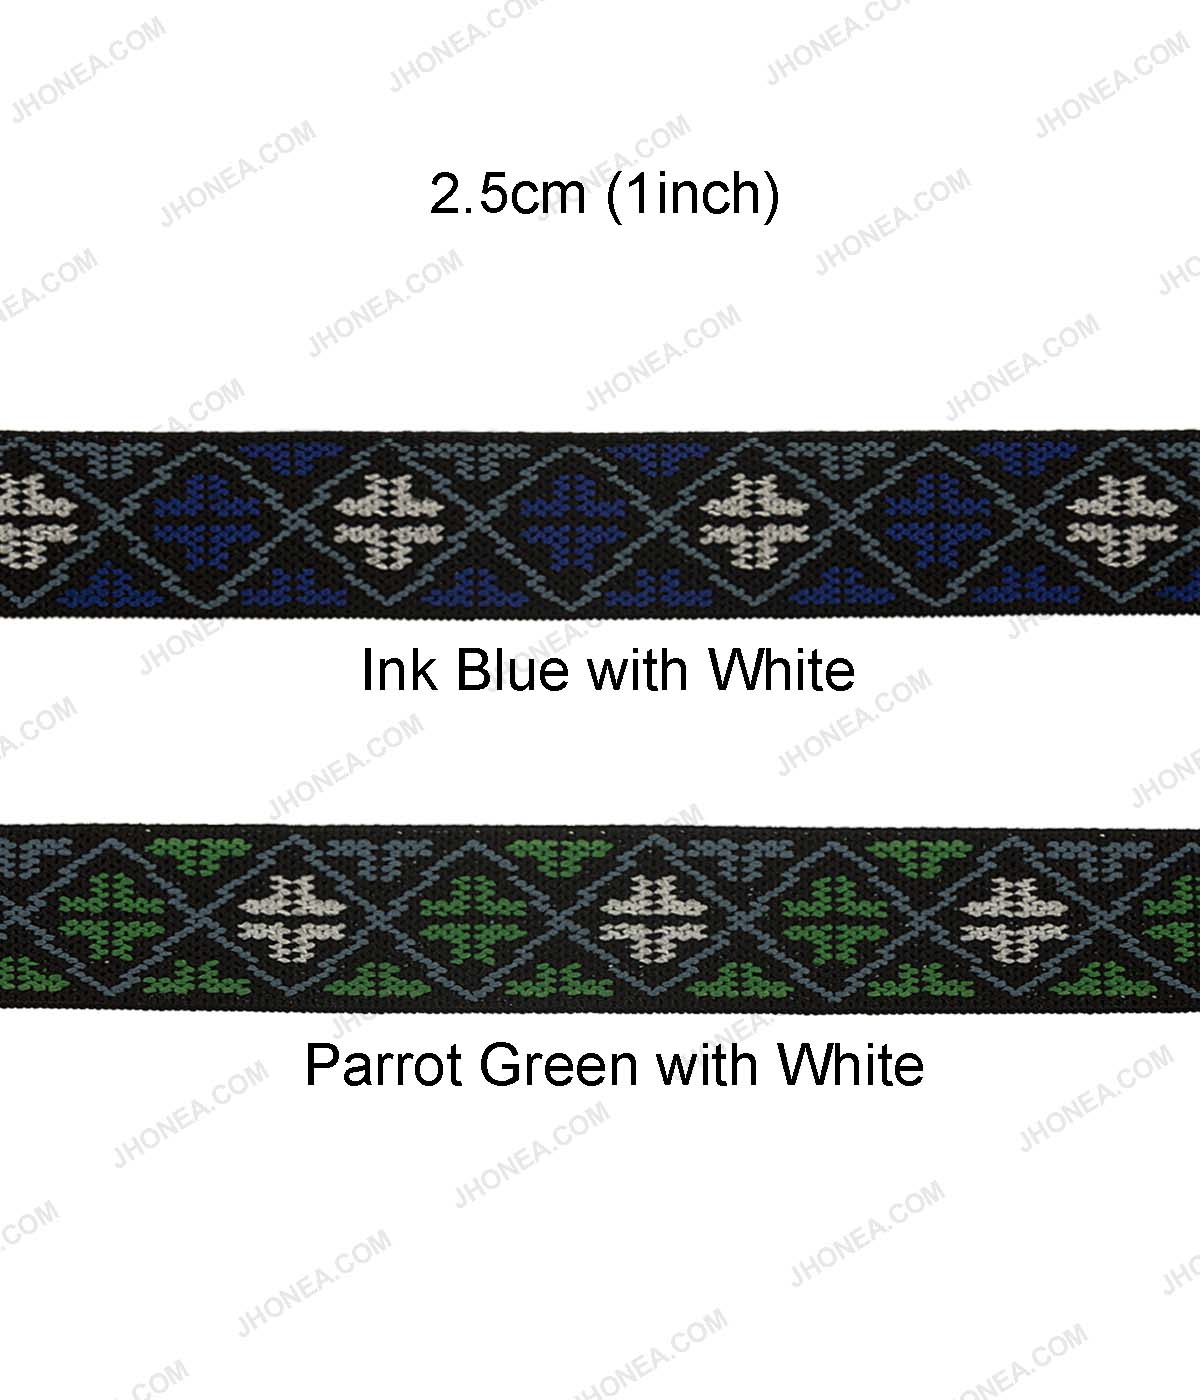 2.5cm (1inch) Dual Color Soft Patterned Woven Elastic